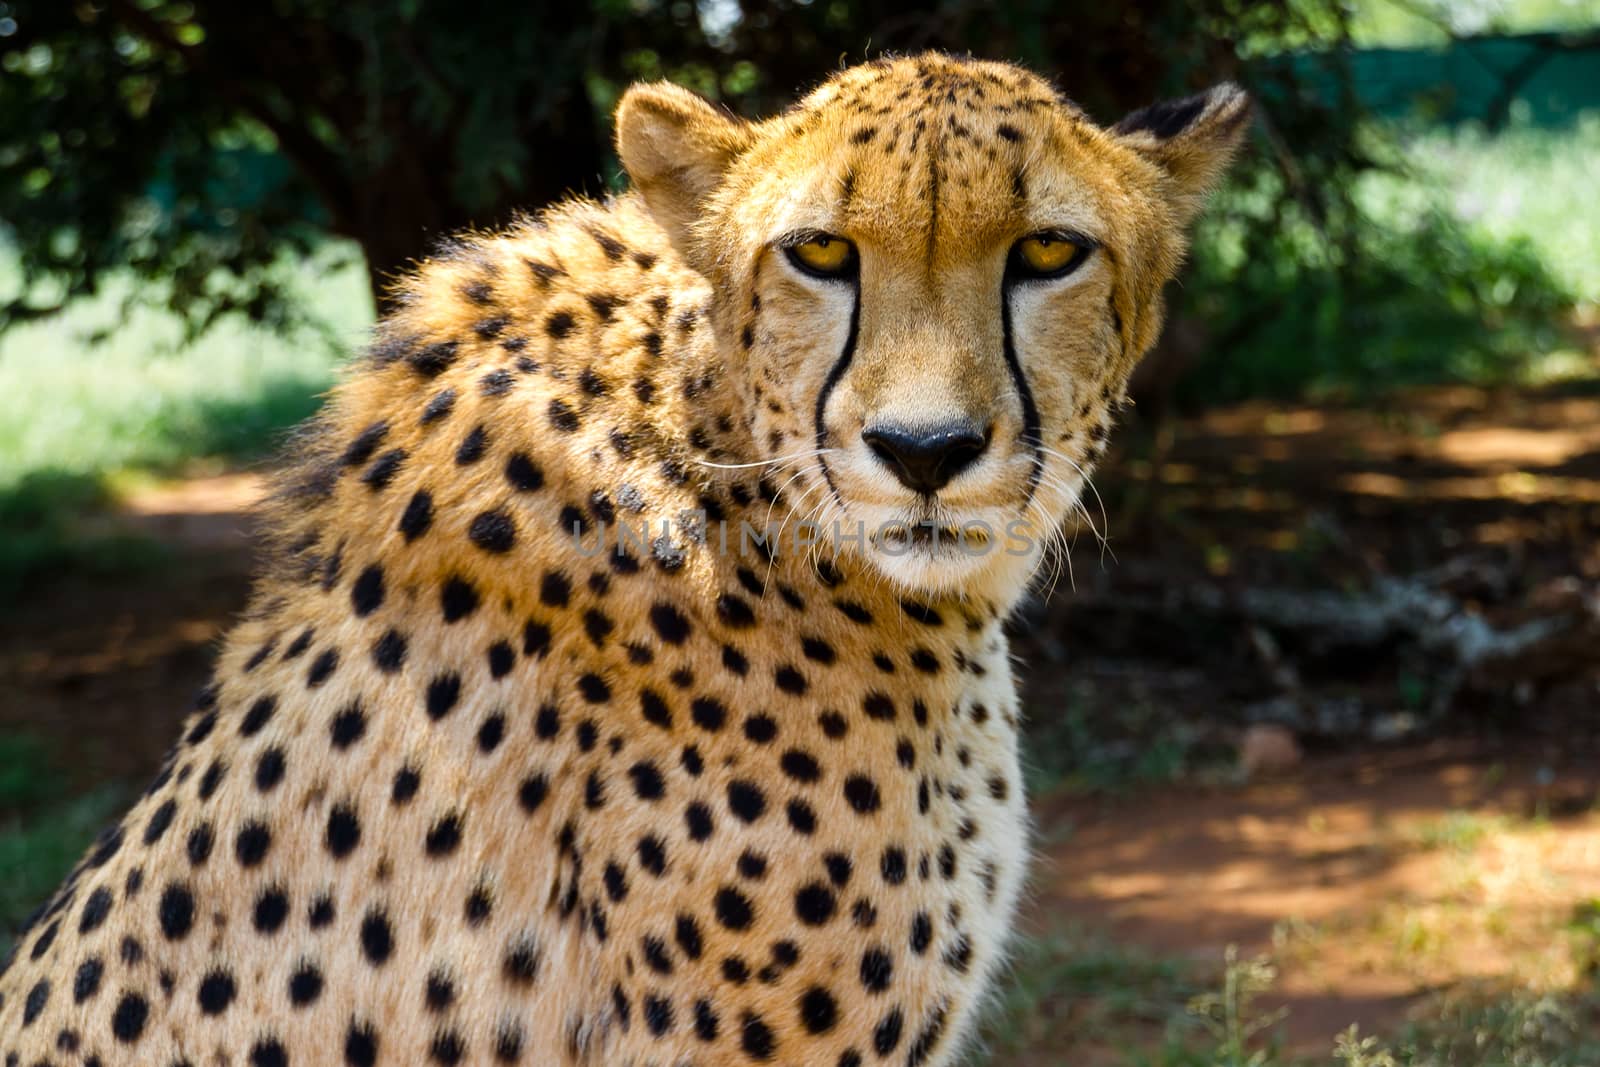 South African Cheetah (Acinonyx Jubatus) stares intensely into the camera with its yellow eyes.